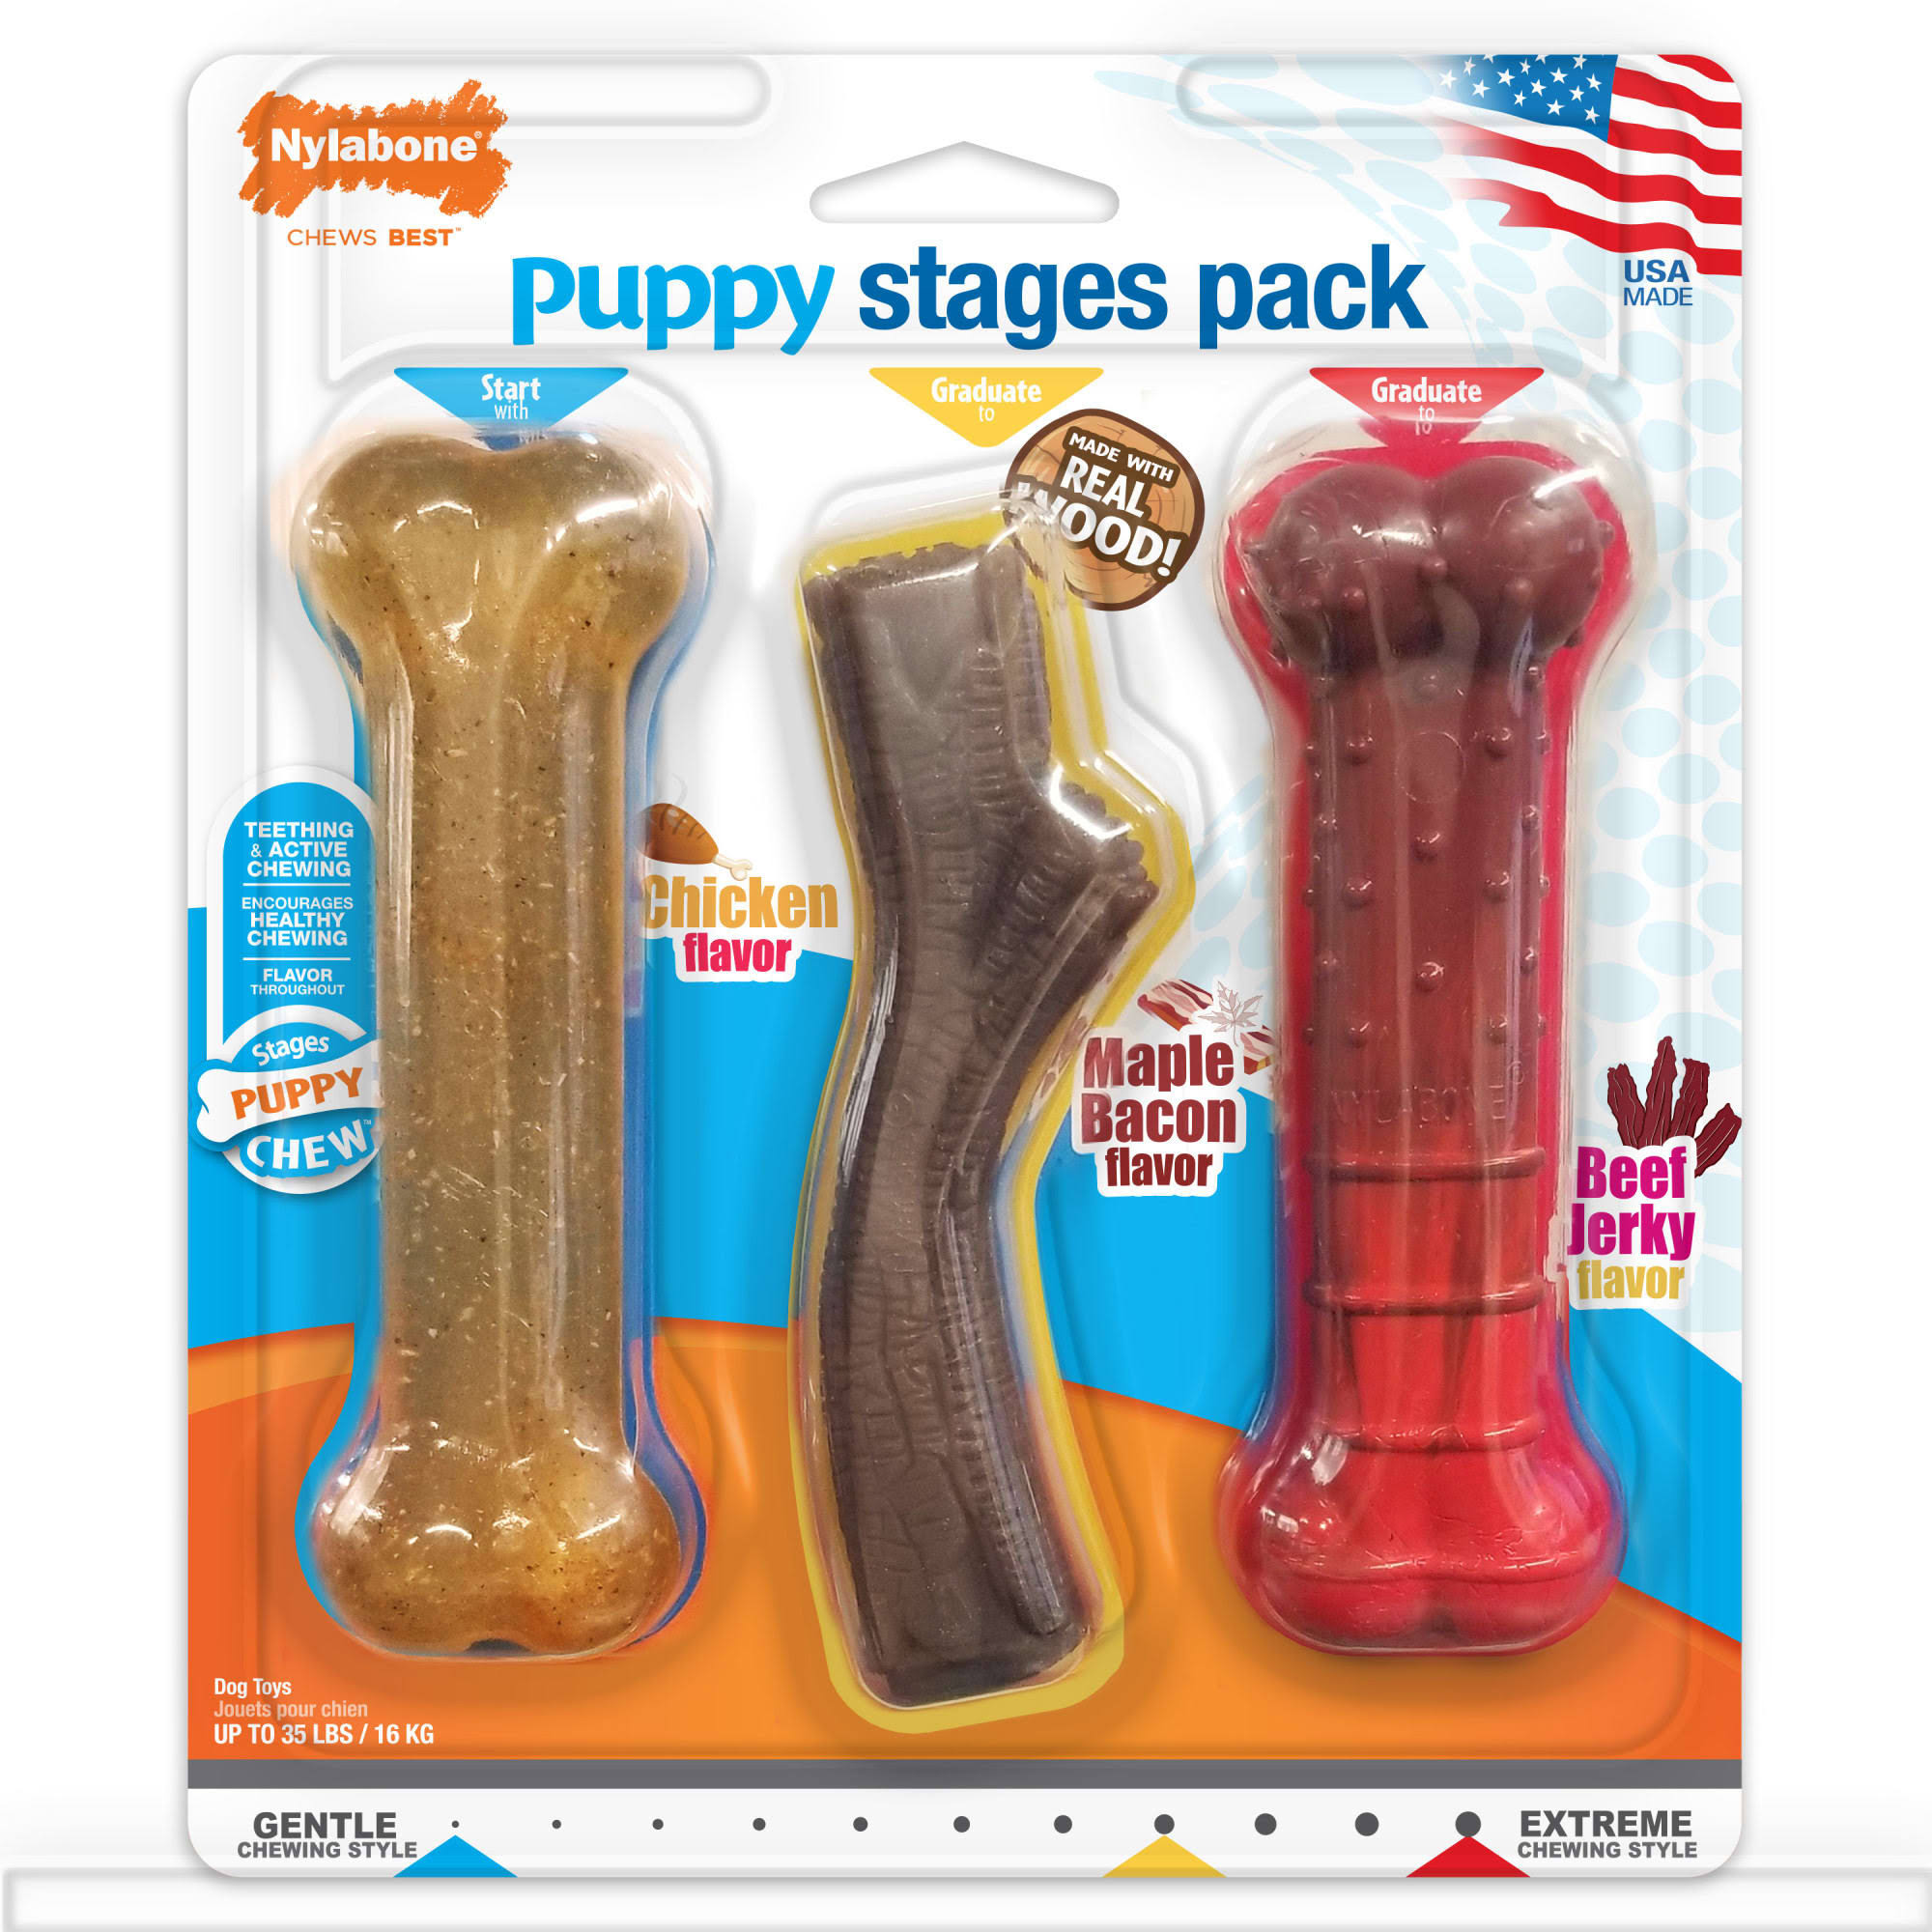 Nylabone Puppy Stages Dog Chew Toy Pack - Puppy Chew Toys For Teething And Chewing - Puppy Supplies - Chicken, Maple Bacon, And Beef Jerky Flavors,